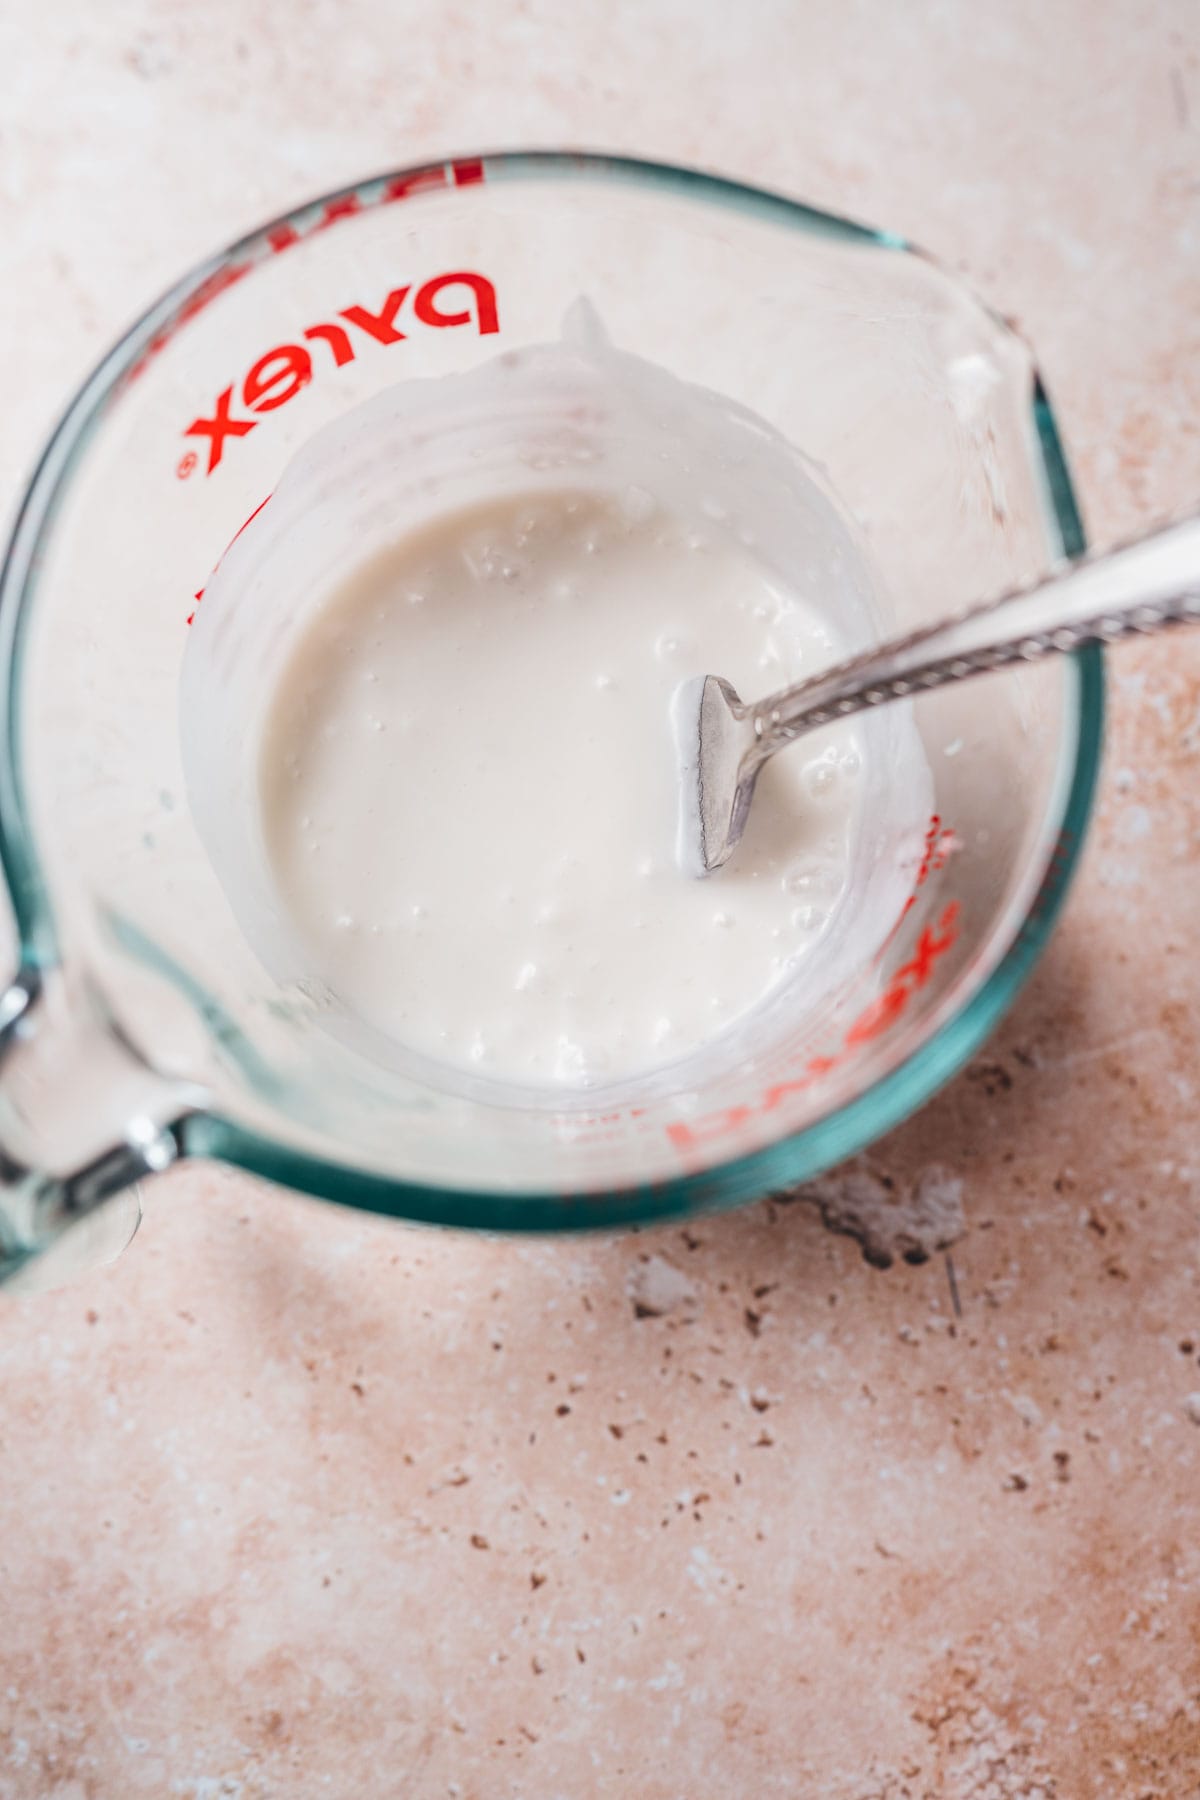 A measuring bowl filled with white milk and a silver fork.